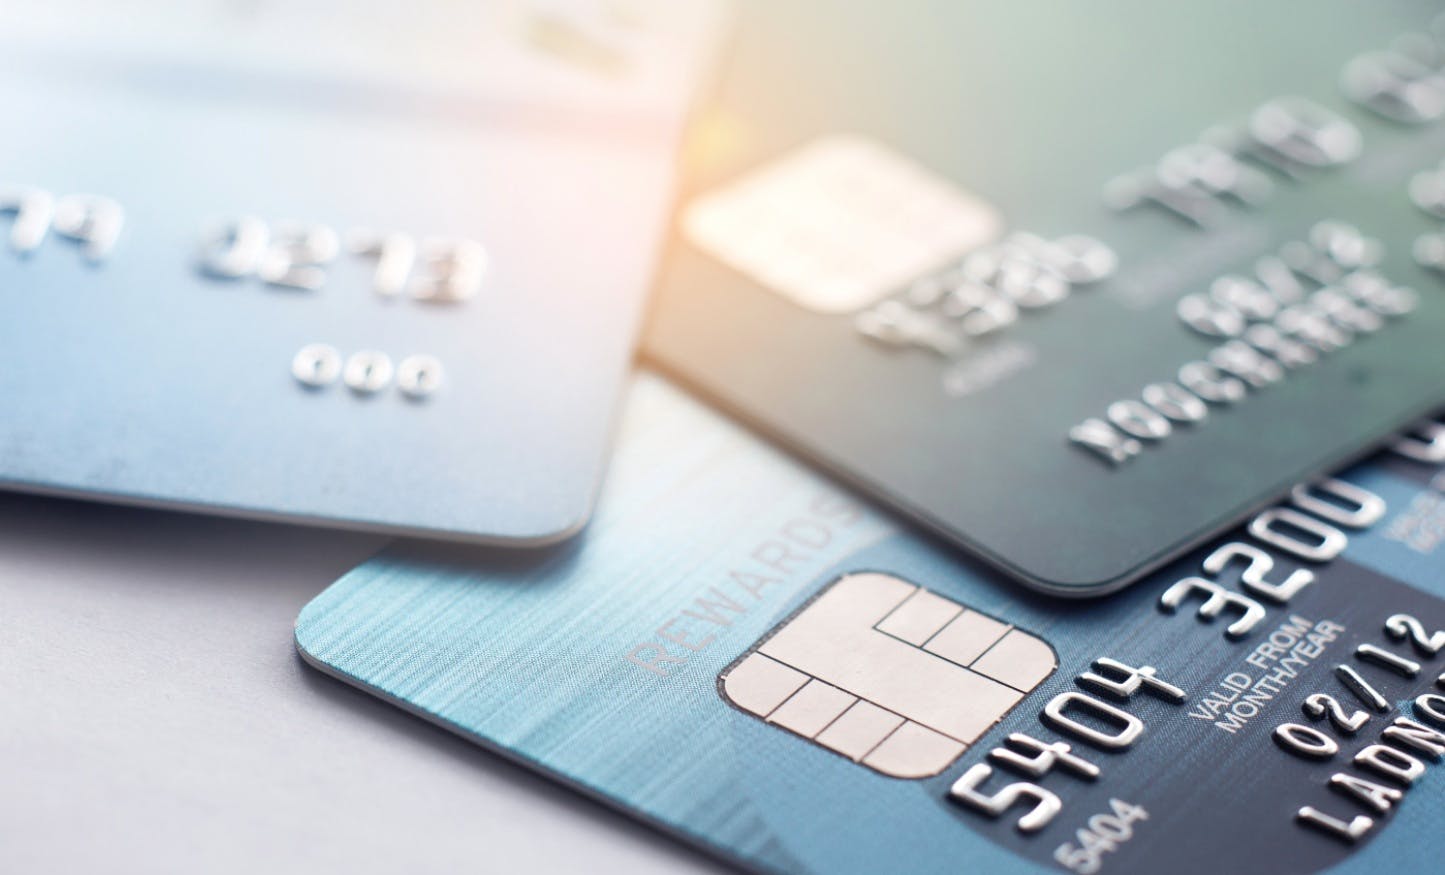 The Best Credit Cards With No Annual Fee in 2022